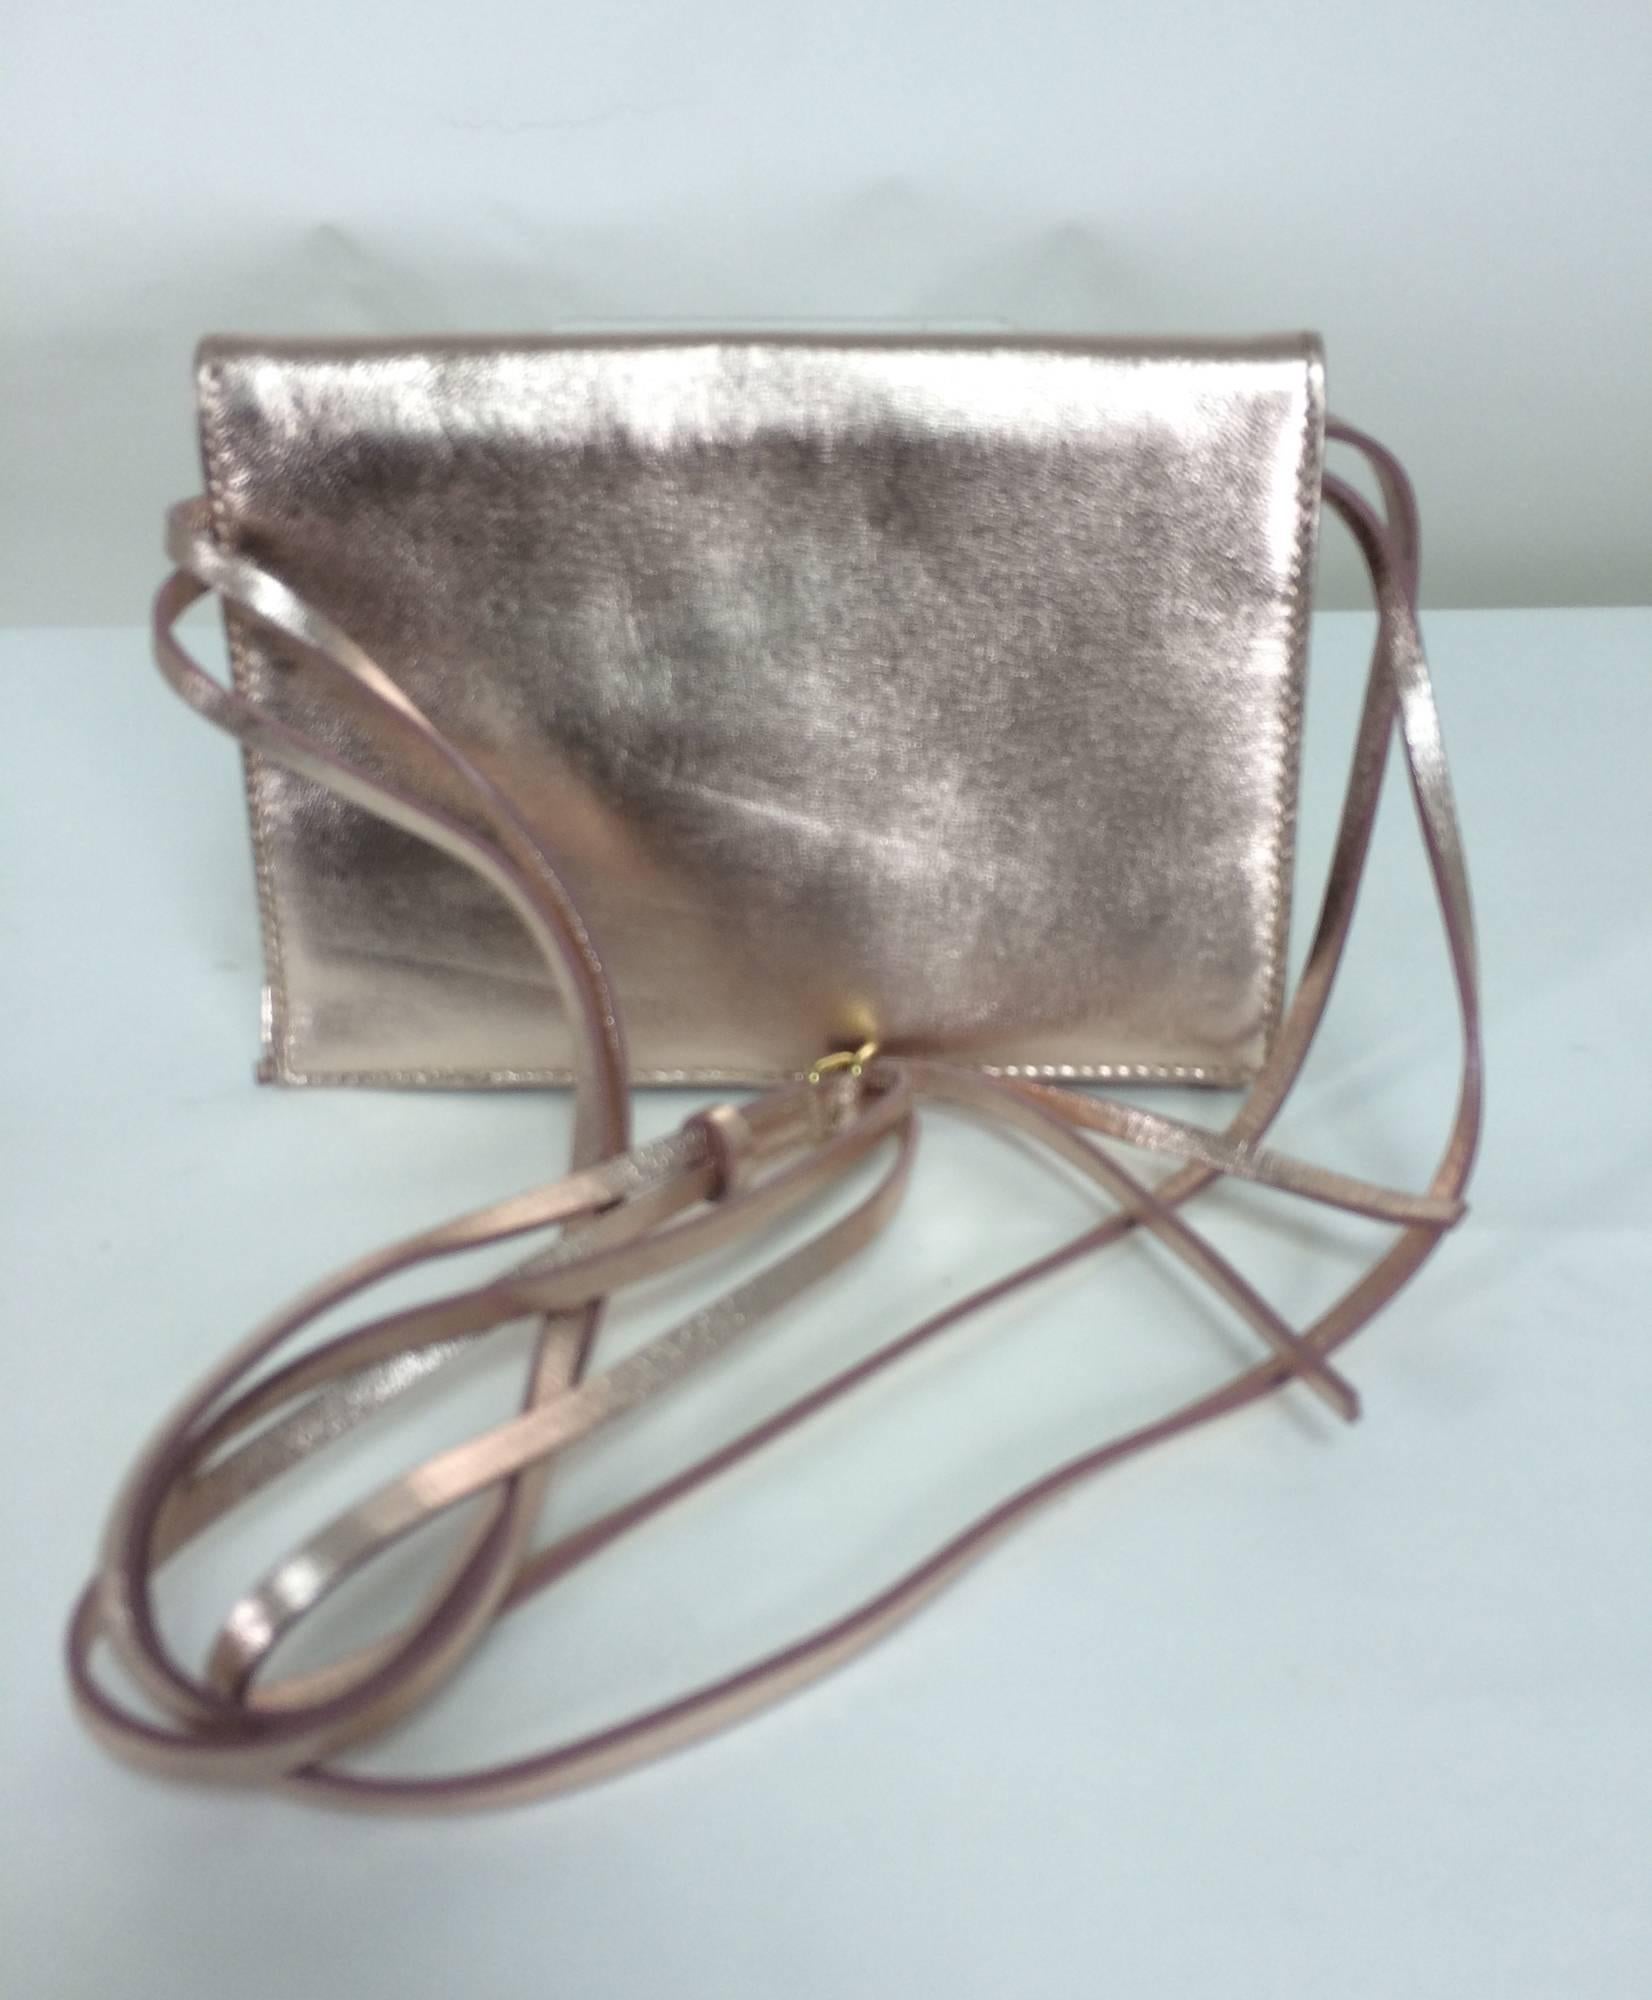 Vintage Baccarat Eclipse pale pink metallic leather with crystal shoulder bag...New in the box...This bag can be worn as a shoulder bag or carried as a clutch...Multi strand metallic leather shoulder strap has a gold adjustable buckle...Fold over